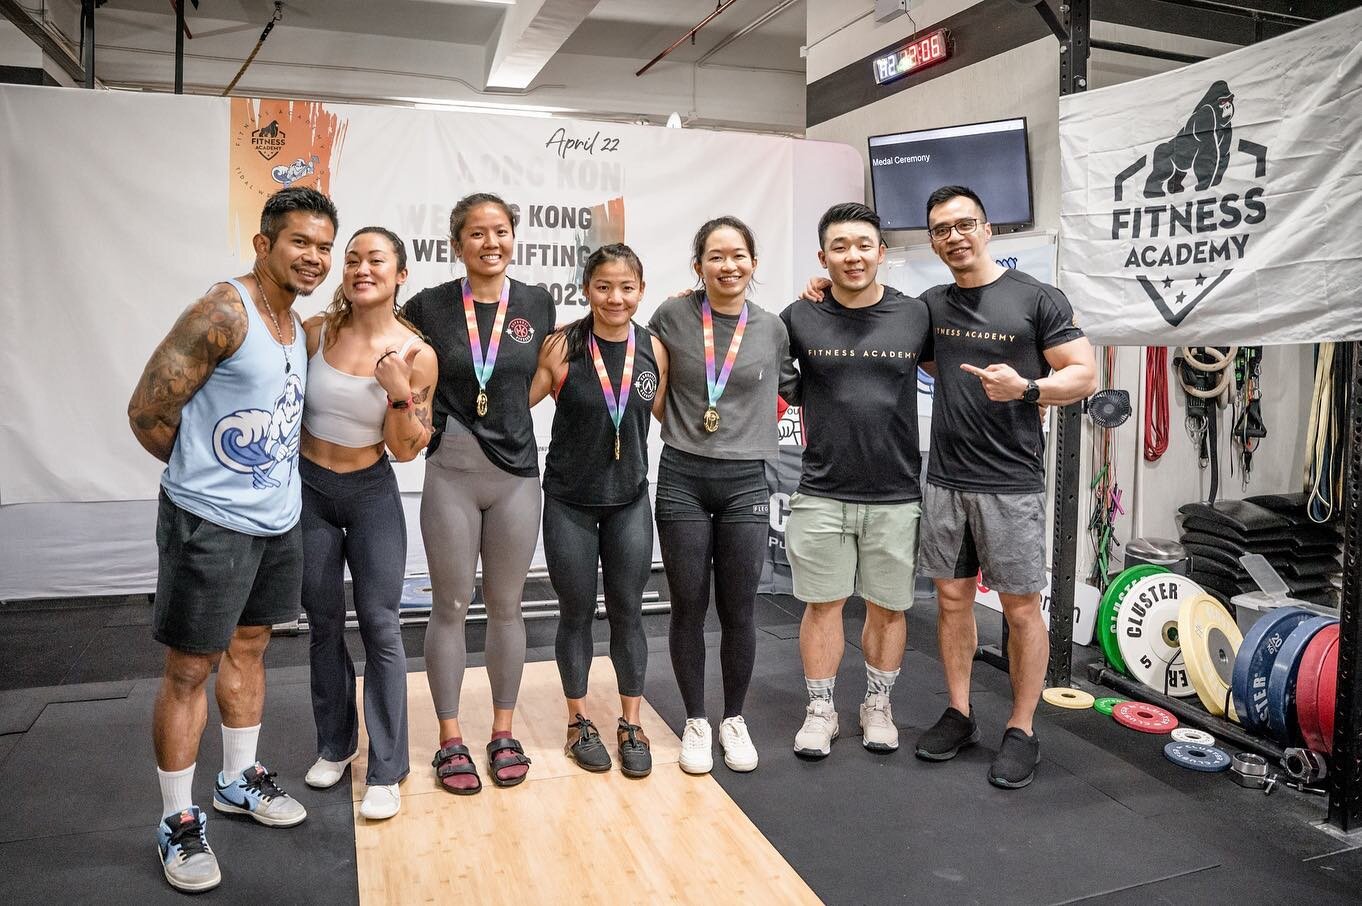 Throwback to the HK Weightlifting Open 2023! 🏋️&zwj;♀️
Hosted by Fitness Academy x Tidal Weightlifting 

A huge round of applause for all the amazing female winners! 🎉🏆
&mdash;&mdash;&mdash;&mdash;&mdash;&mdash;&mdash;&mdash;&mdash;
- @jayne.so : 